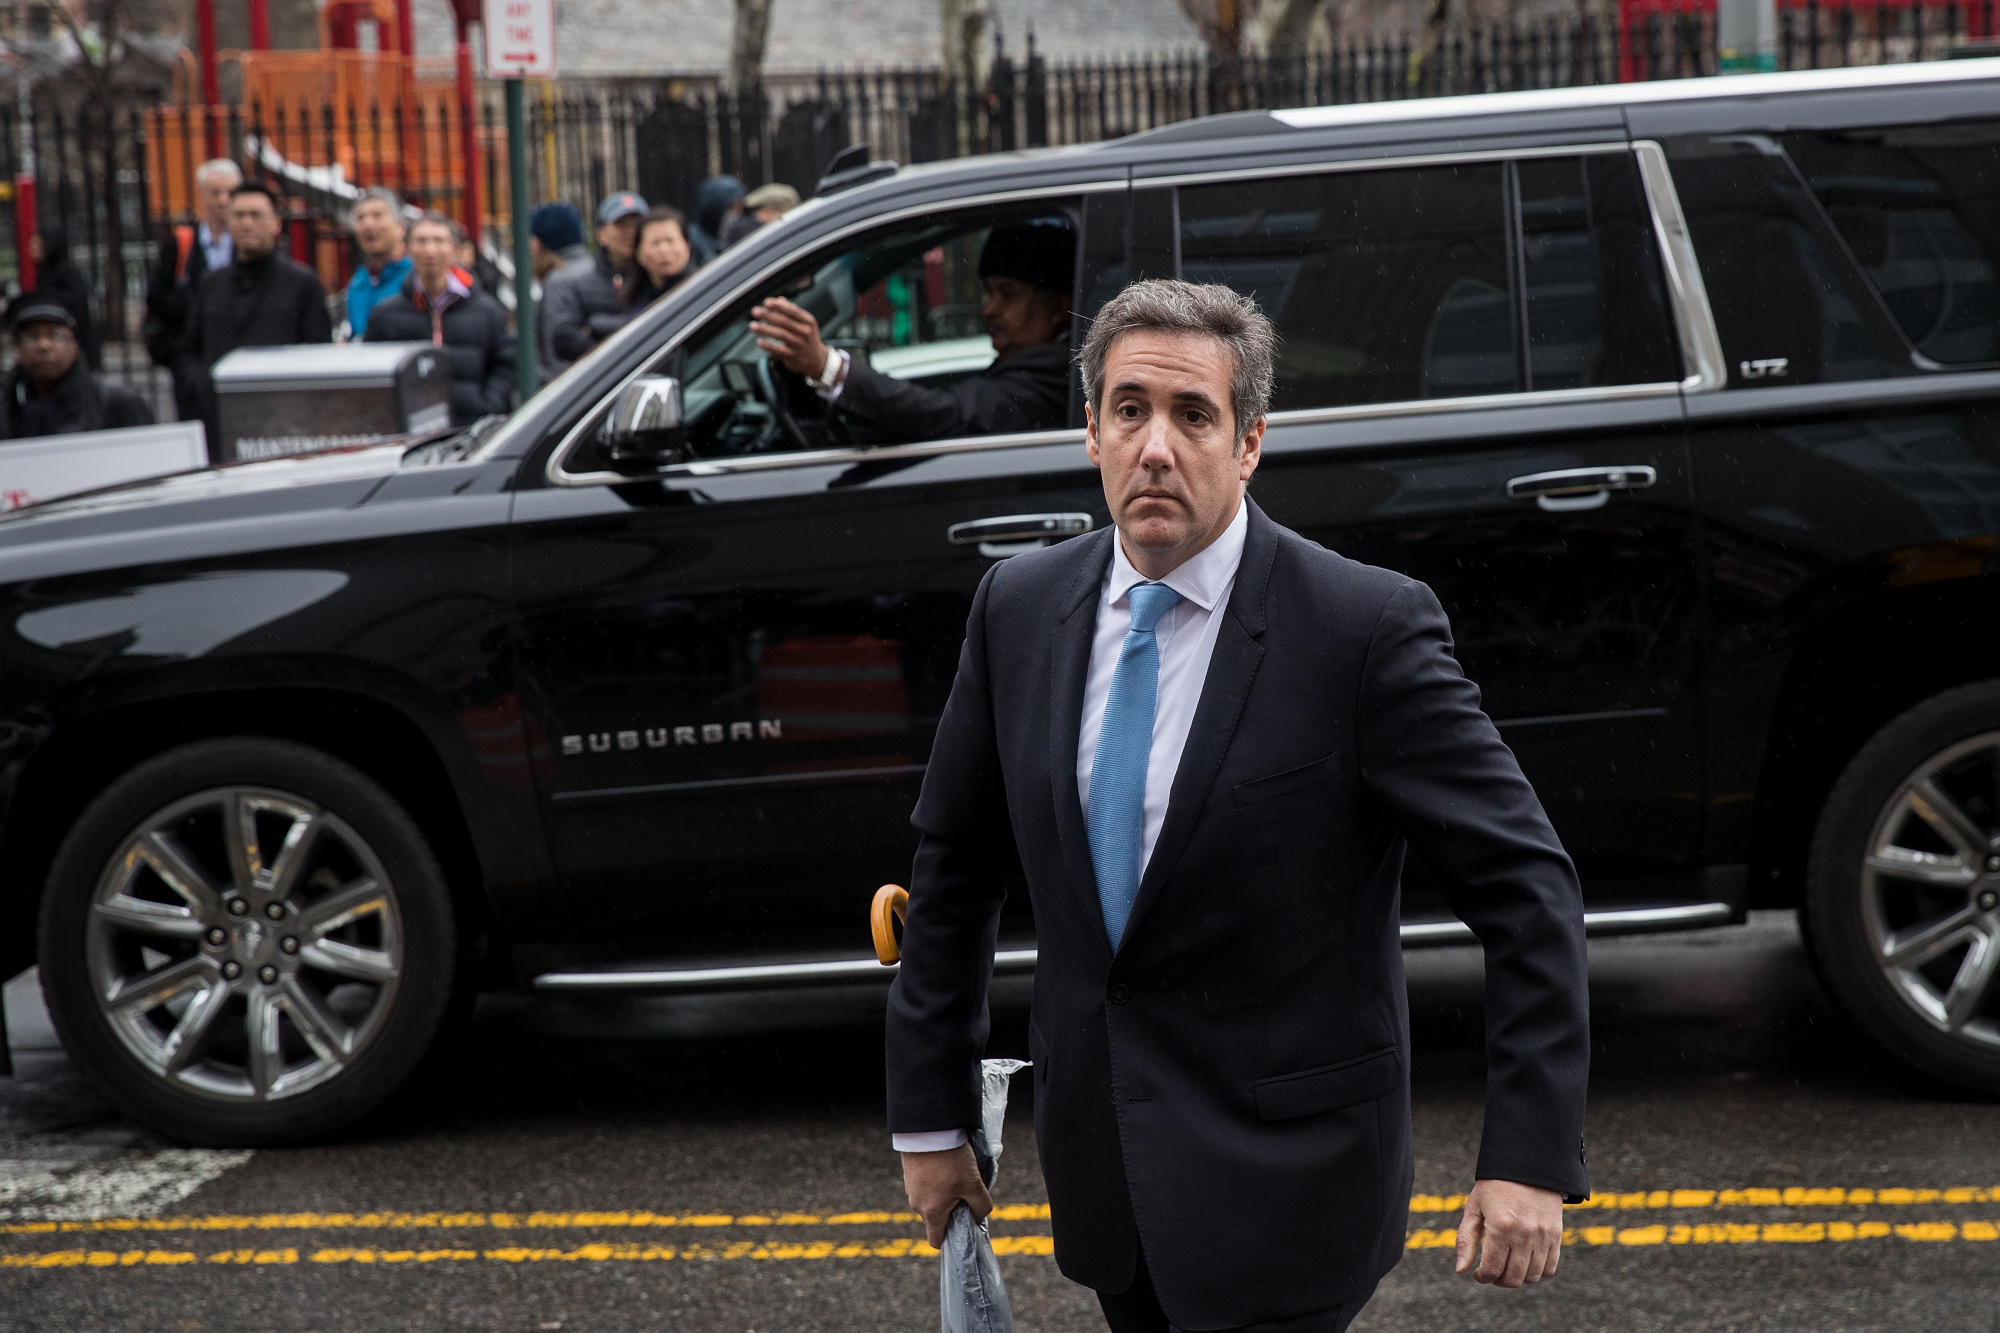 Michael Cohen is not the man who knows all of Trump’s secrets.